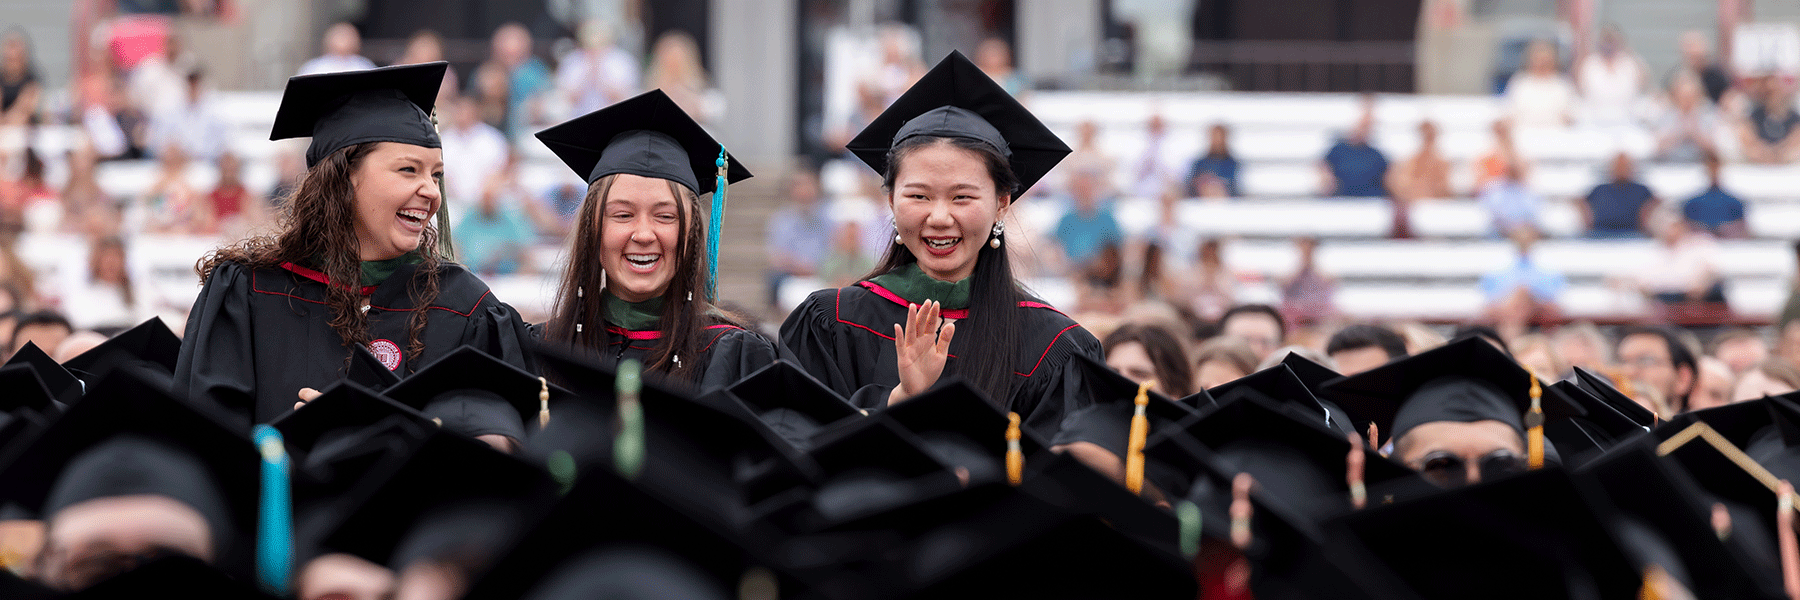 Three female graduates smiling as they stand up in a crowd at commencement.